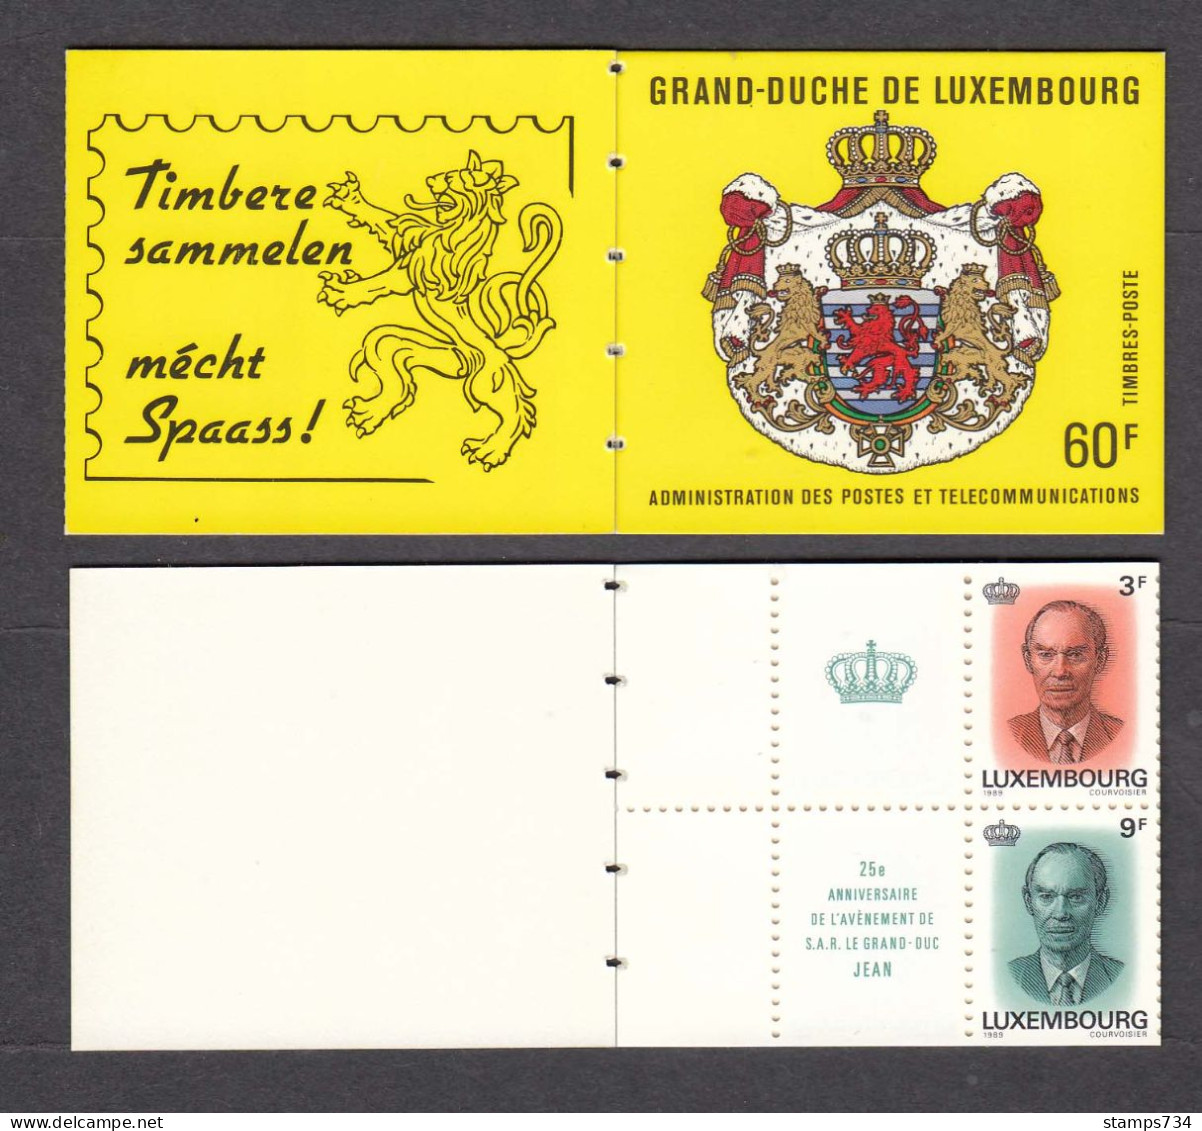 Luxembourg 1989 - Grand-Duc Jean, Michel MH 2, MNH** - Carnets